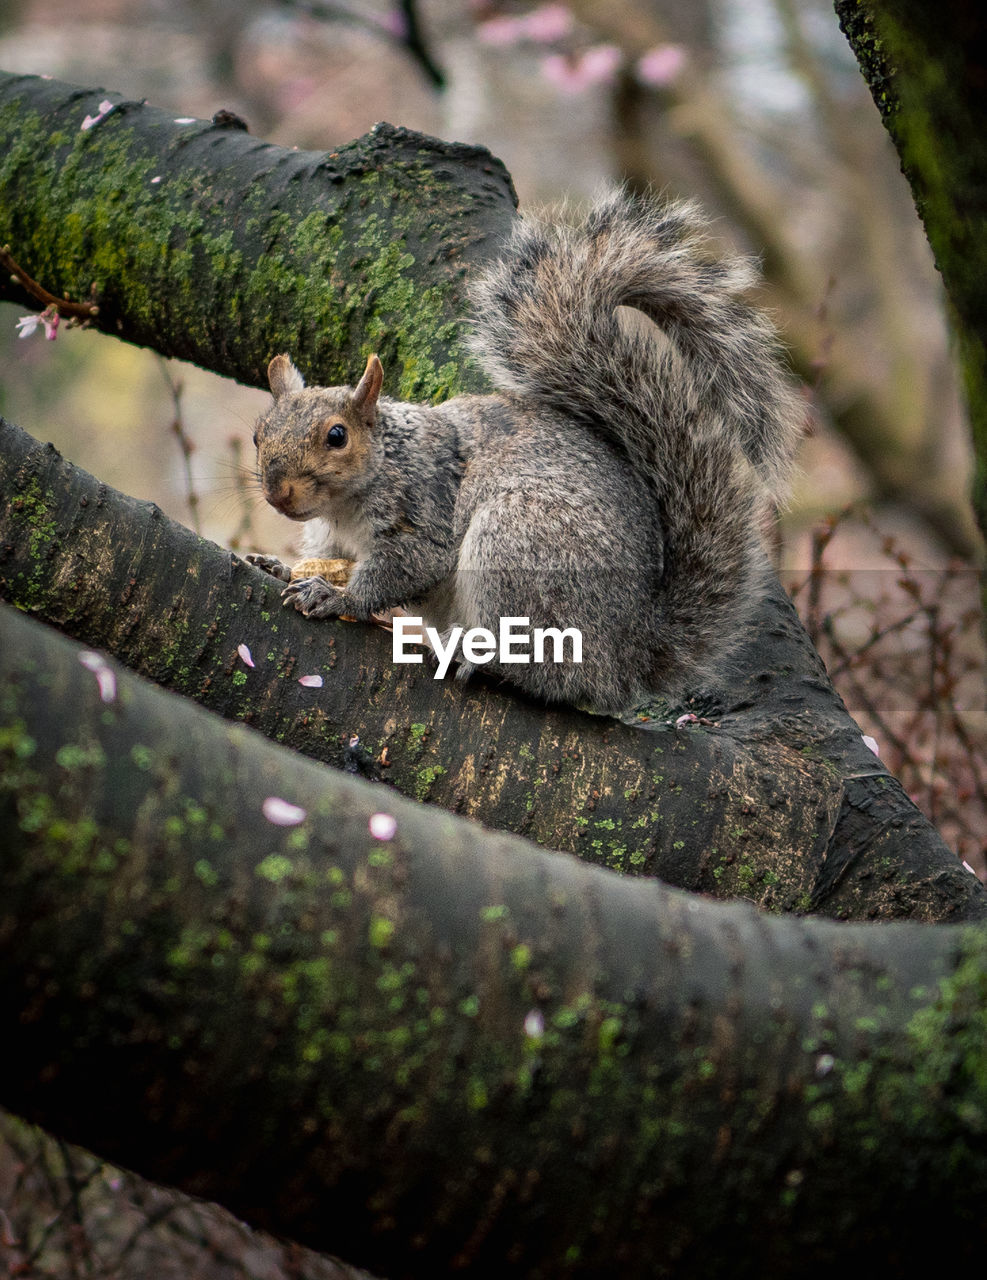 View of squirrel on tree